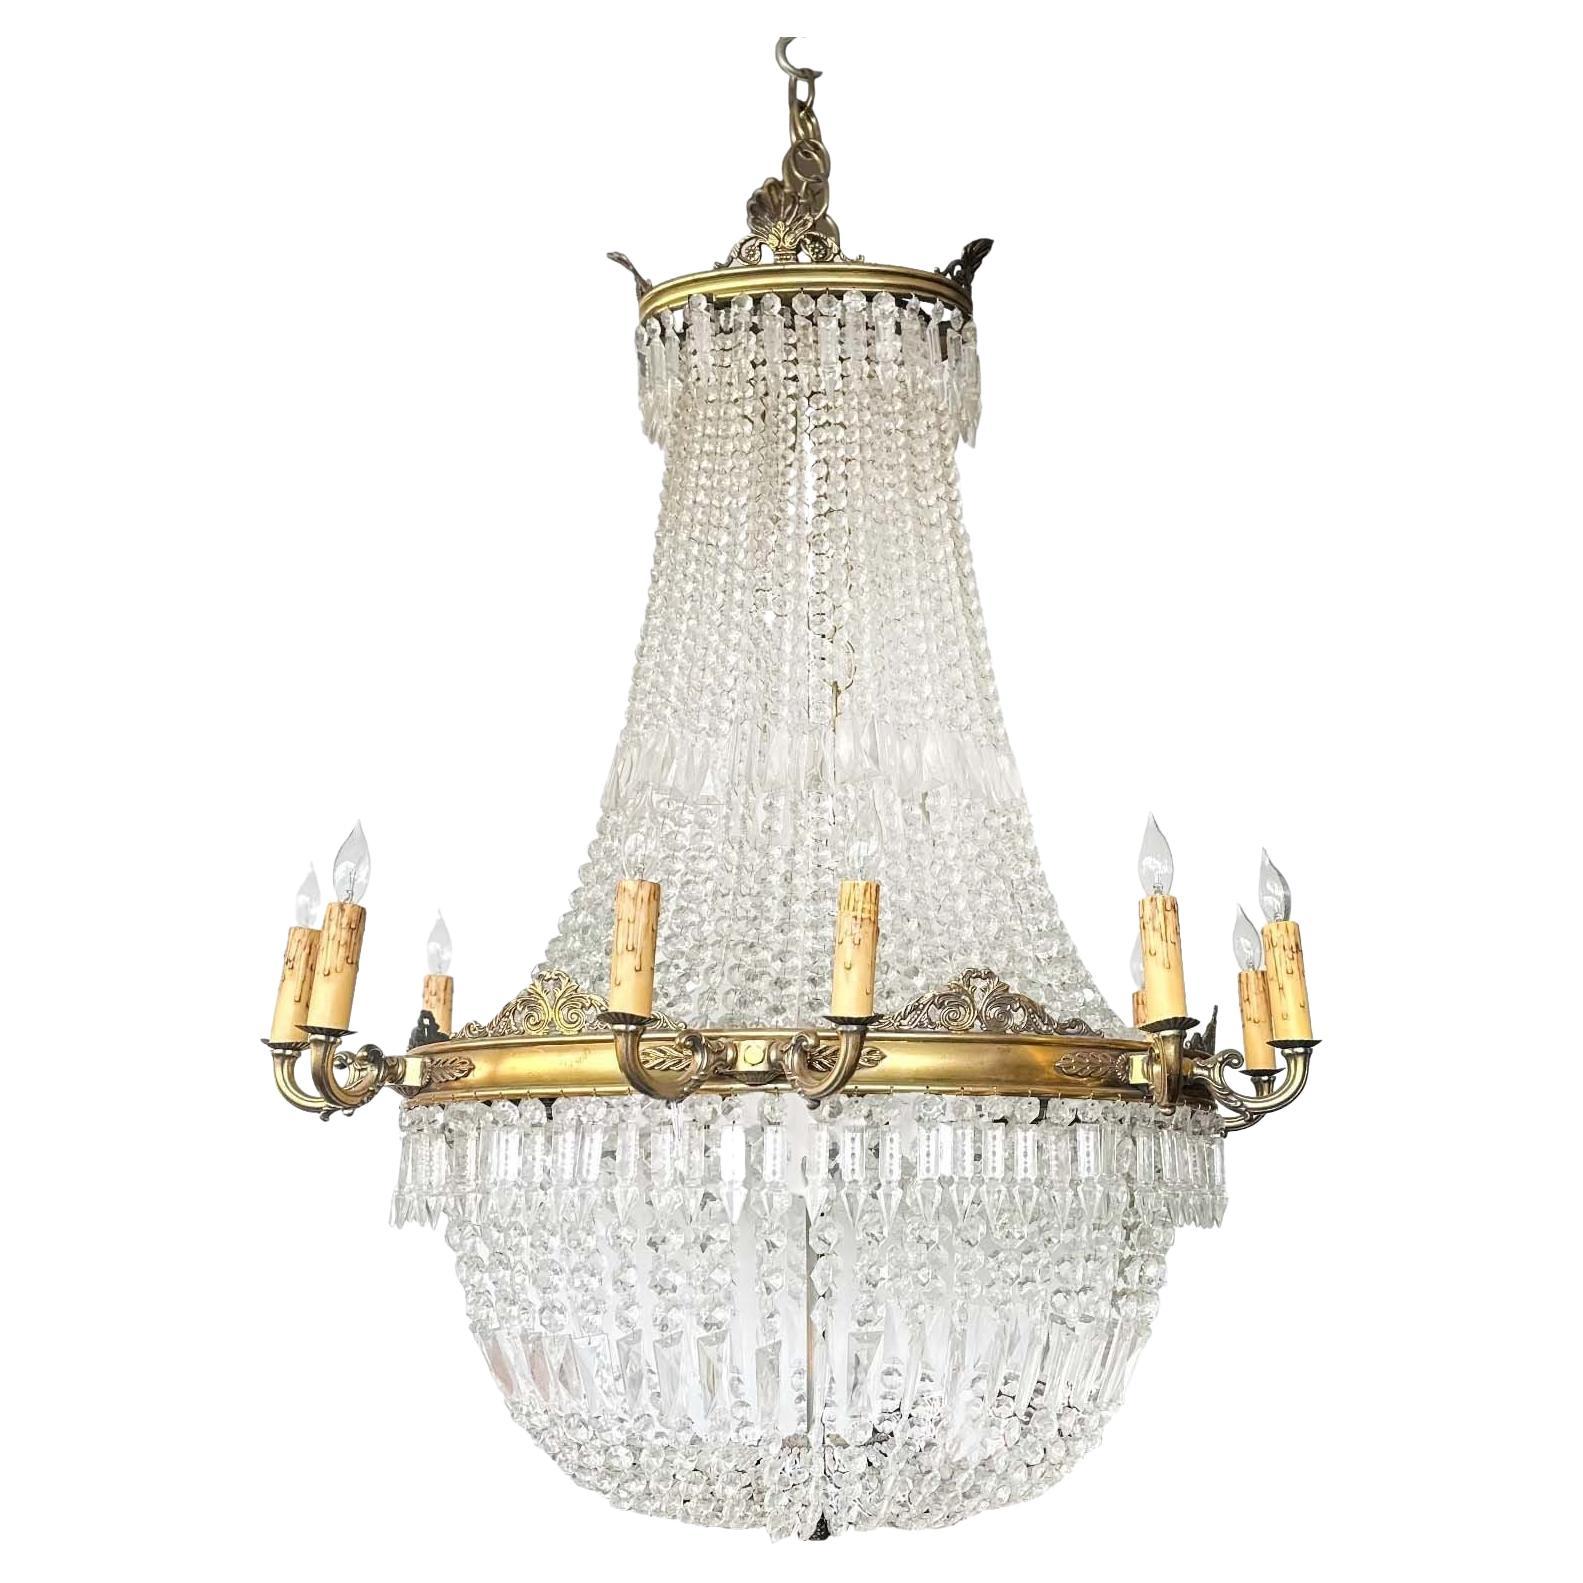 Large French Empire-Style Bronze & Glass Chandelier, c. 1920's For Sale